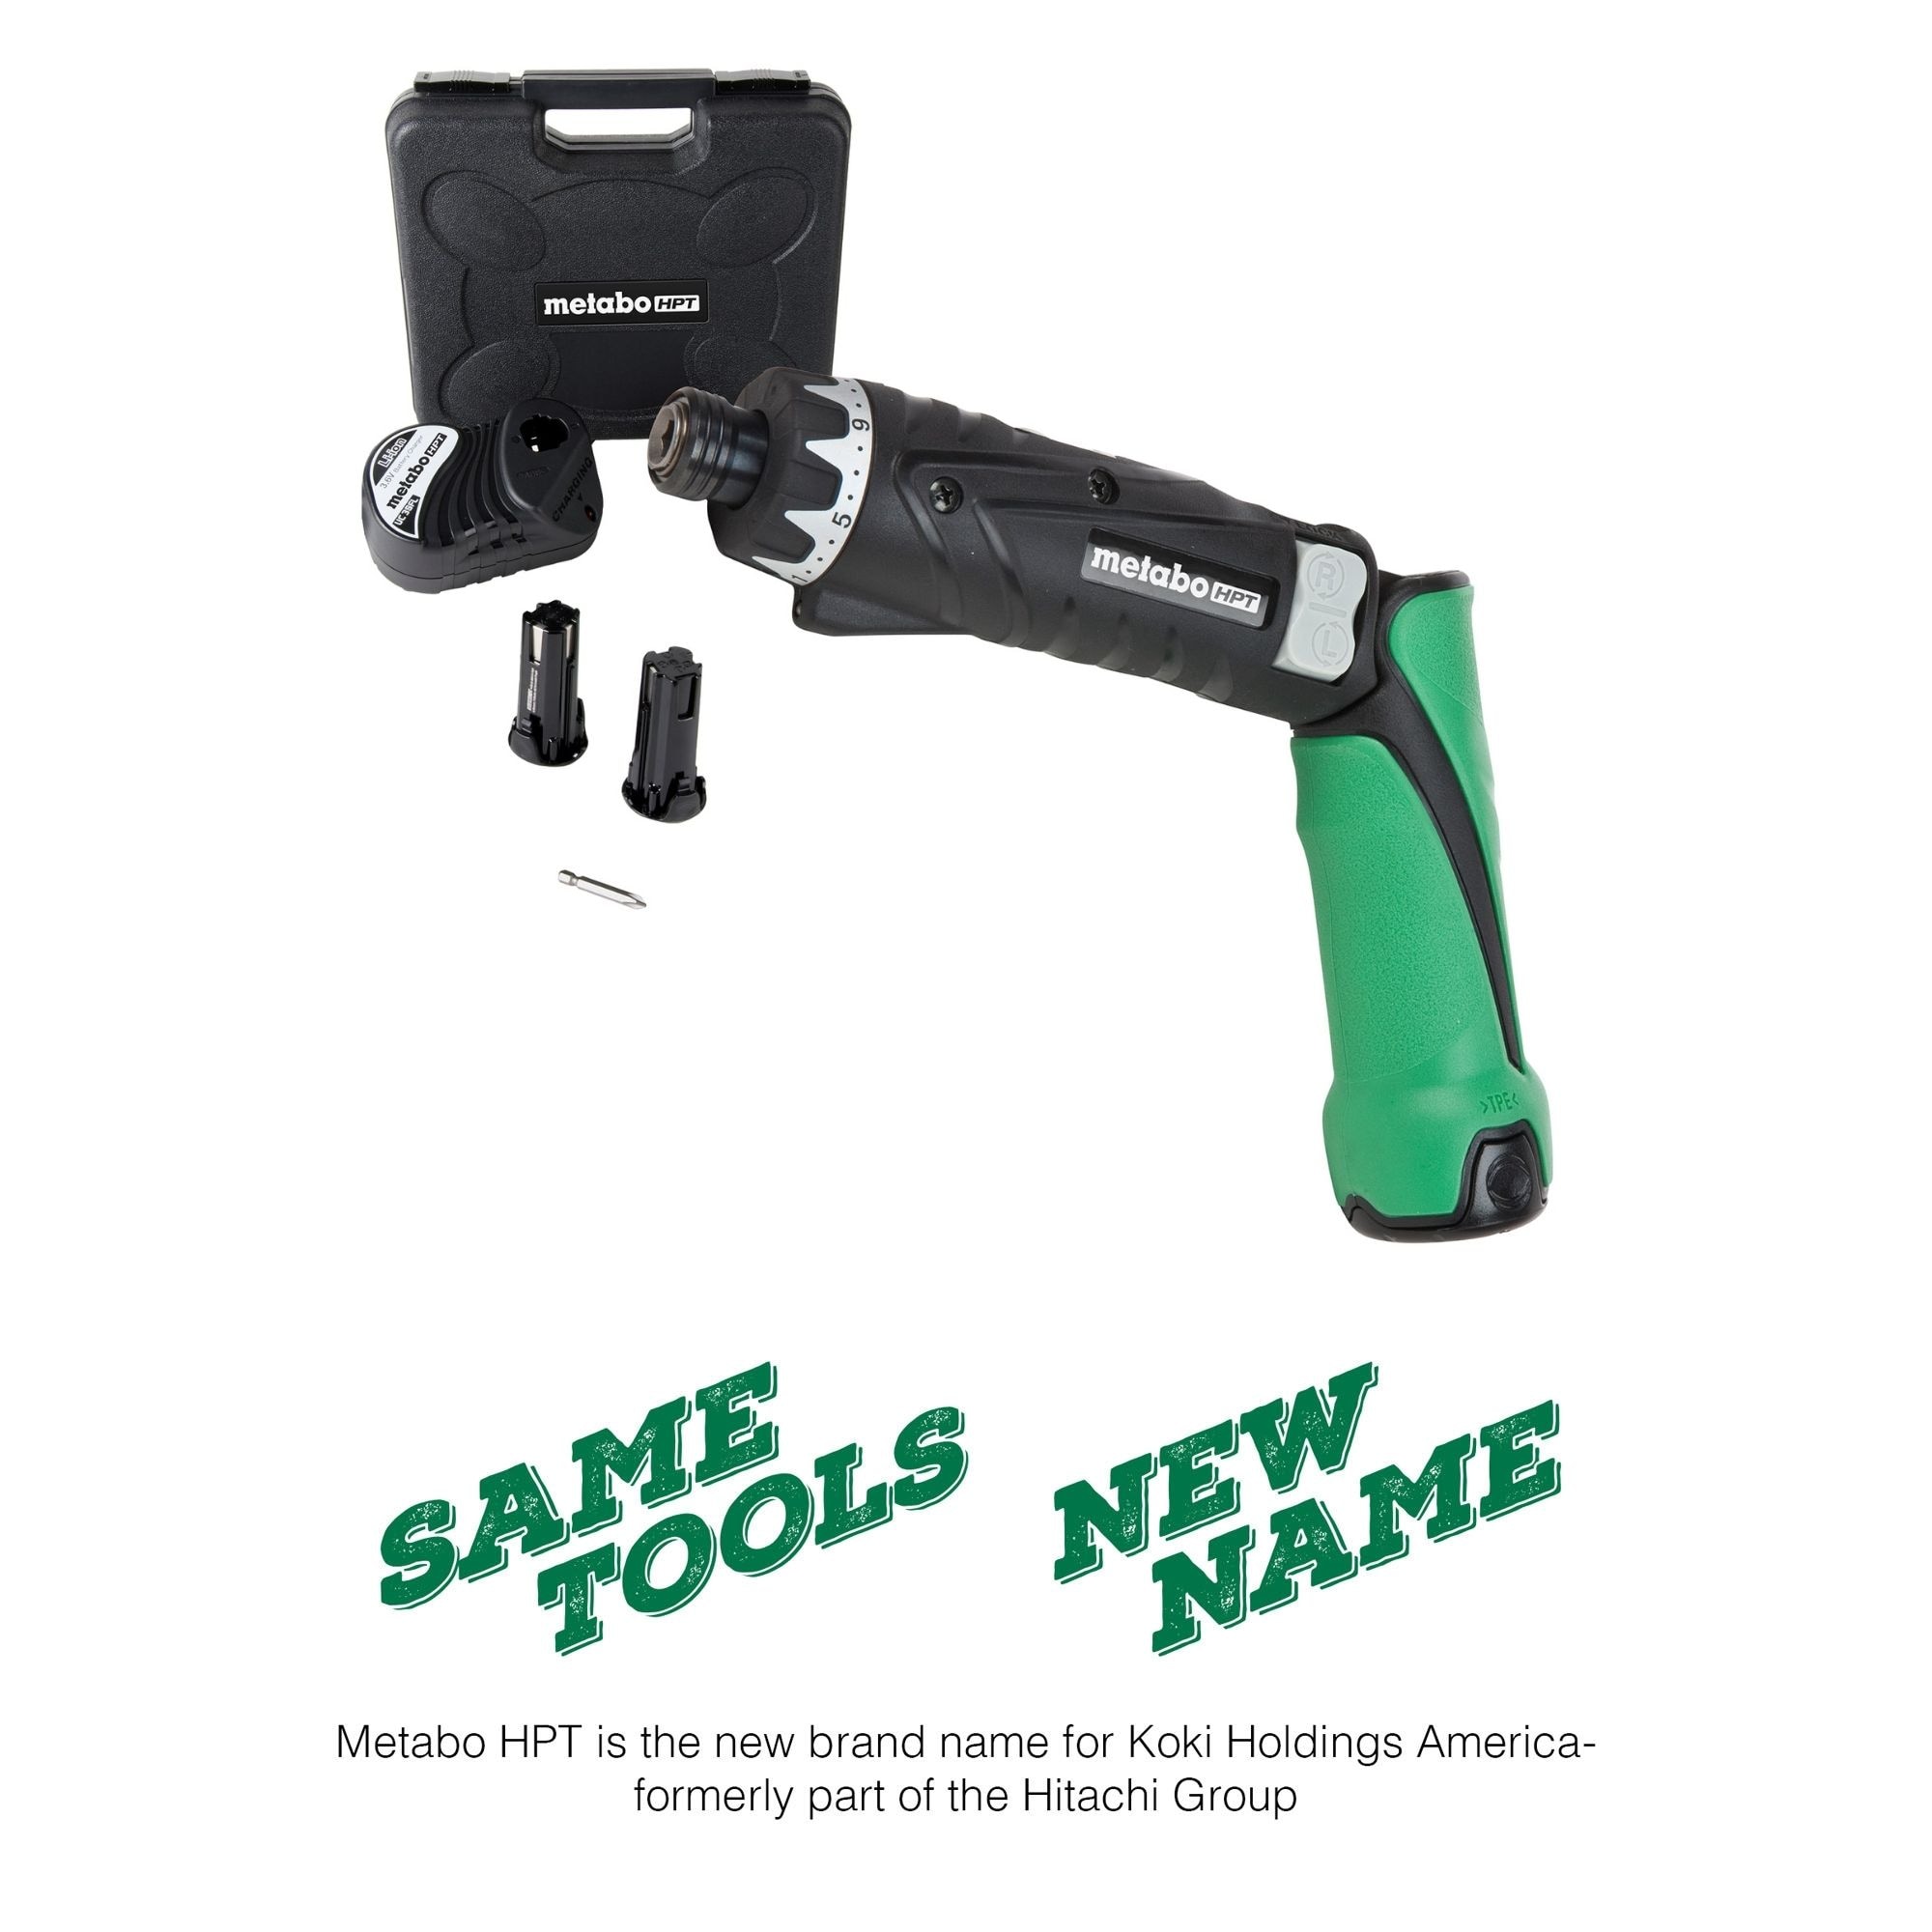 Image of Hitachi DB3DL2 cordless drill at Lowe's